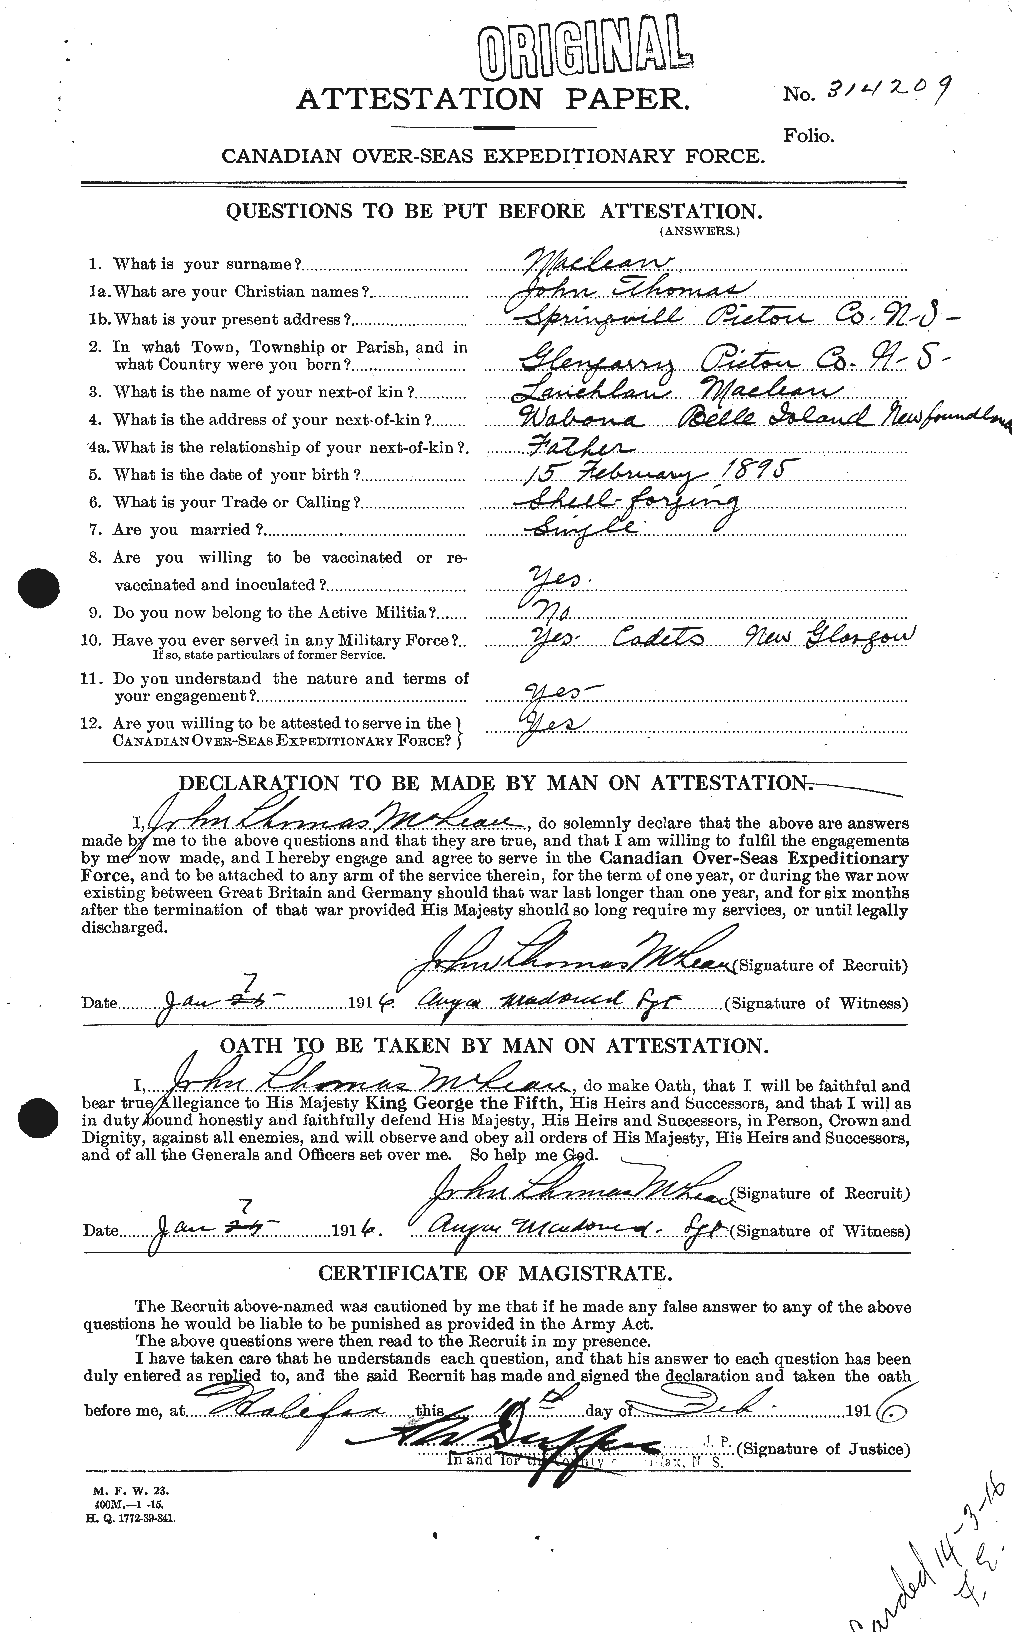 Personnel Records of the First World War - CEF 531883a